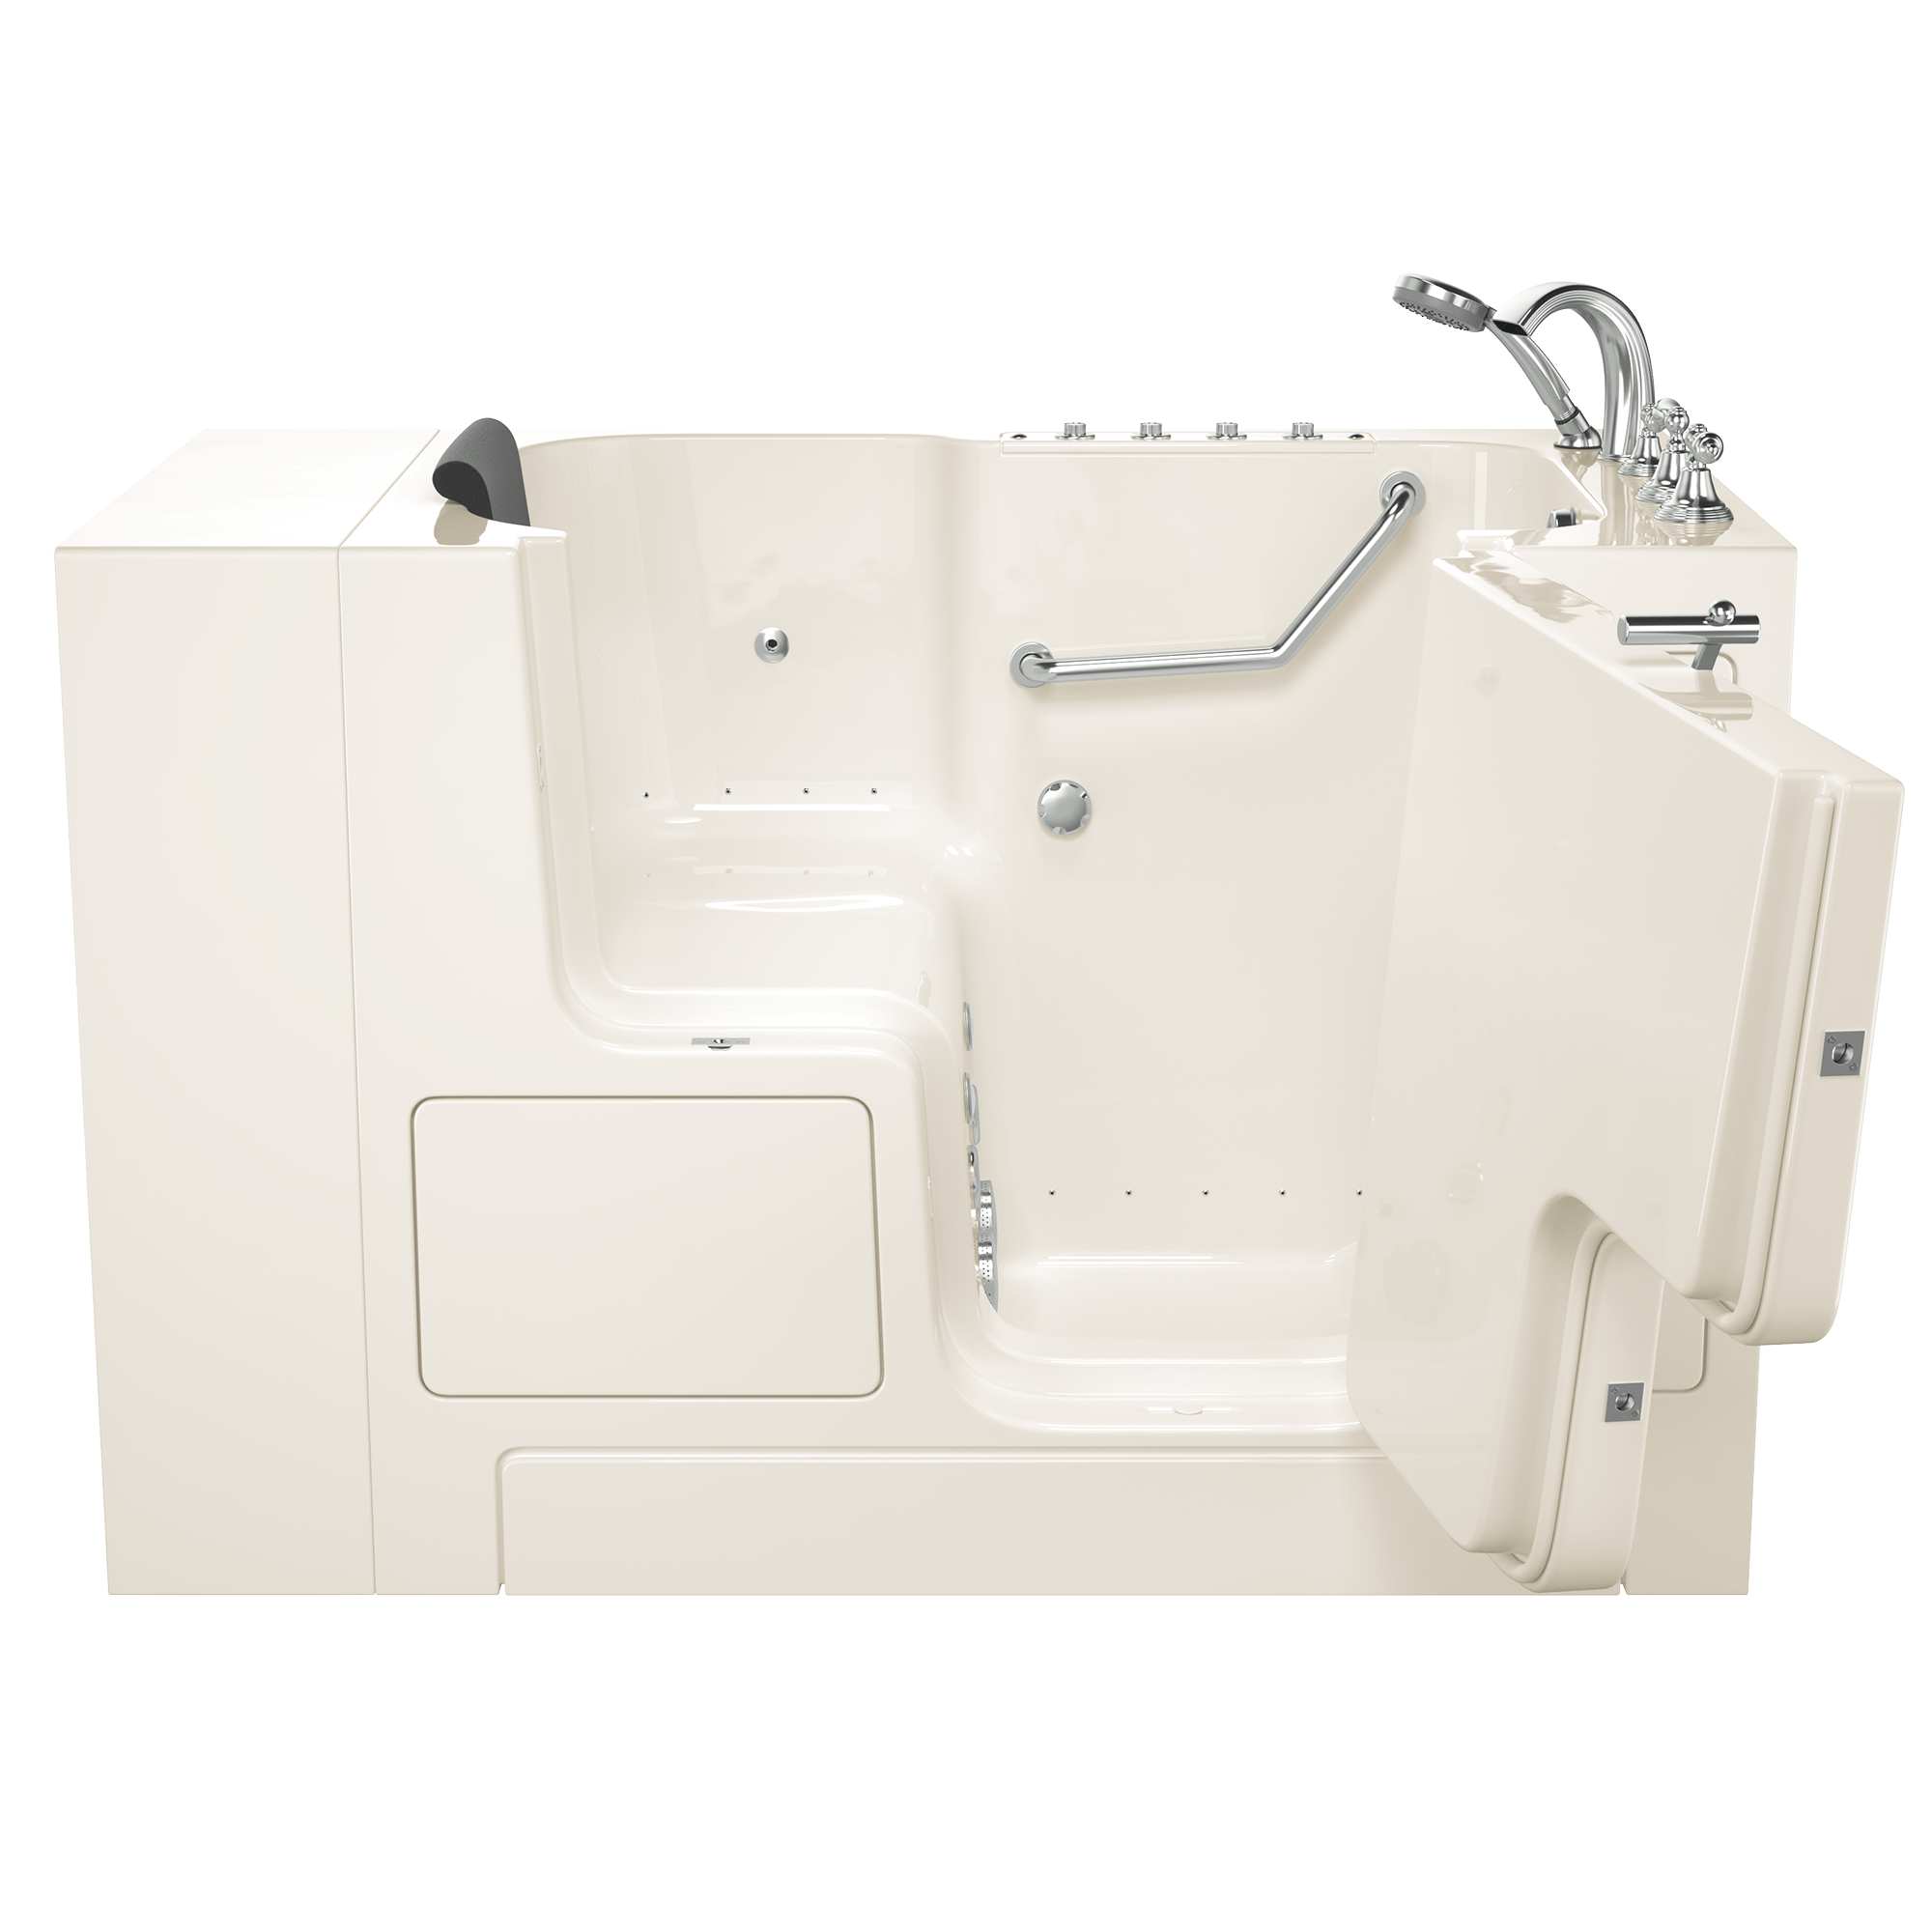 Gelcoat Premium Series 32 x 52 -Inch Walk-in Tub With Combination Air Spa and Whirlpool Systems - Right-Hand Drain With Faucet